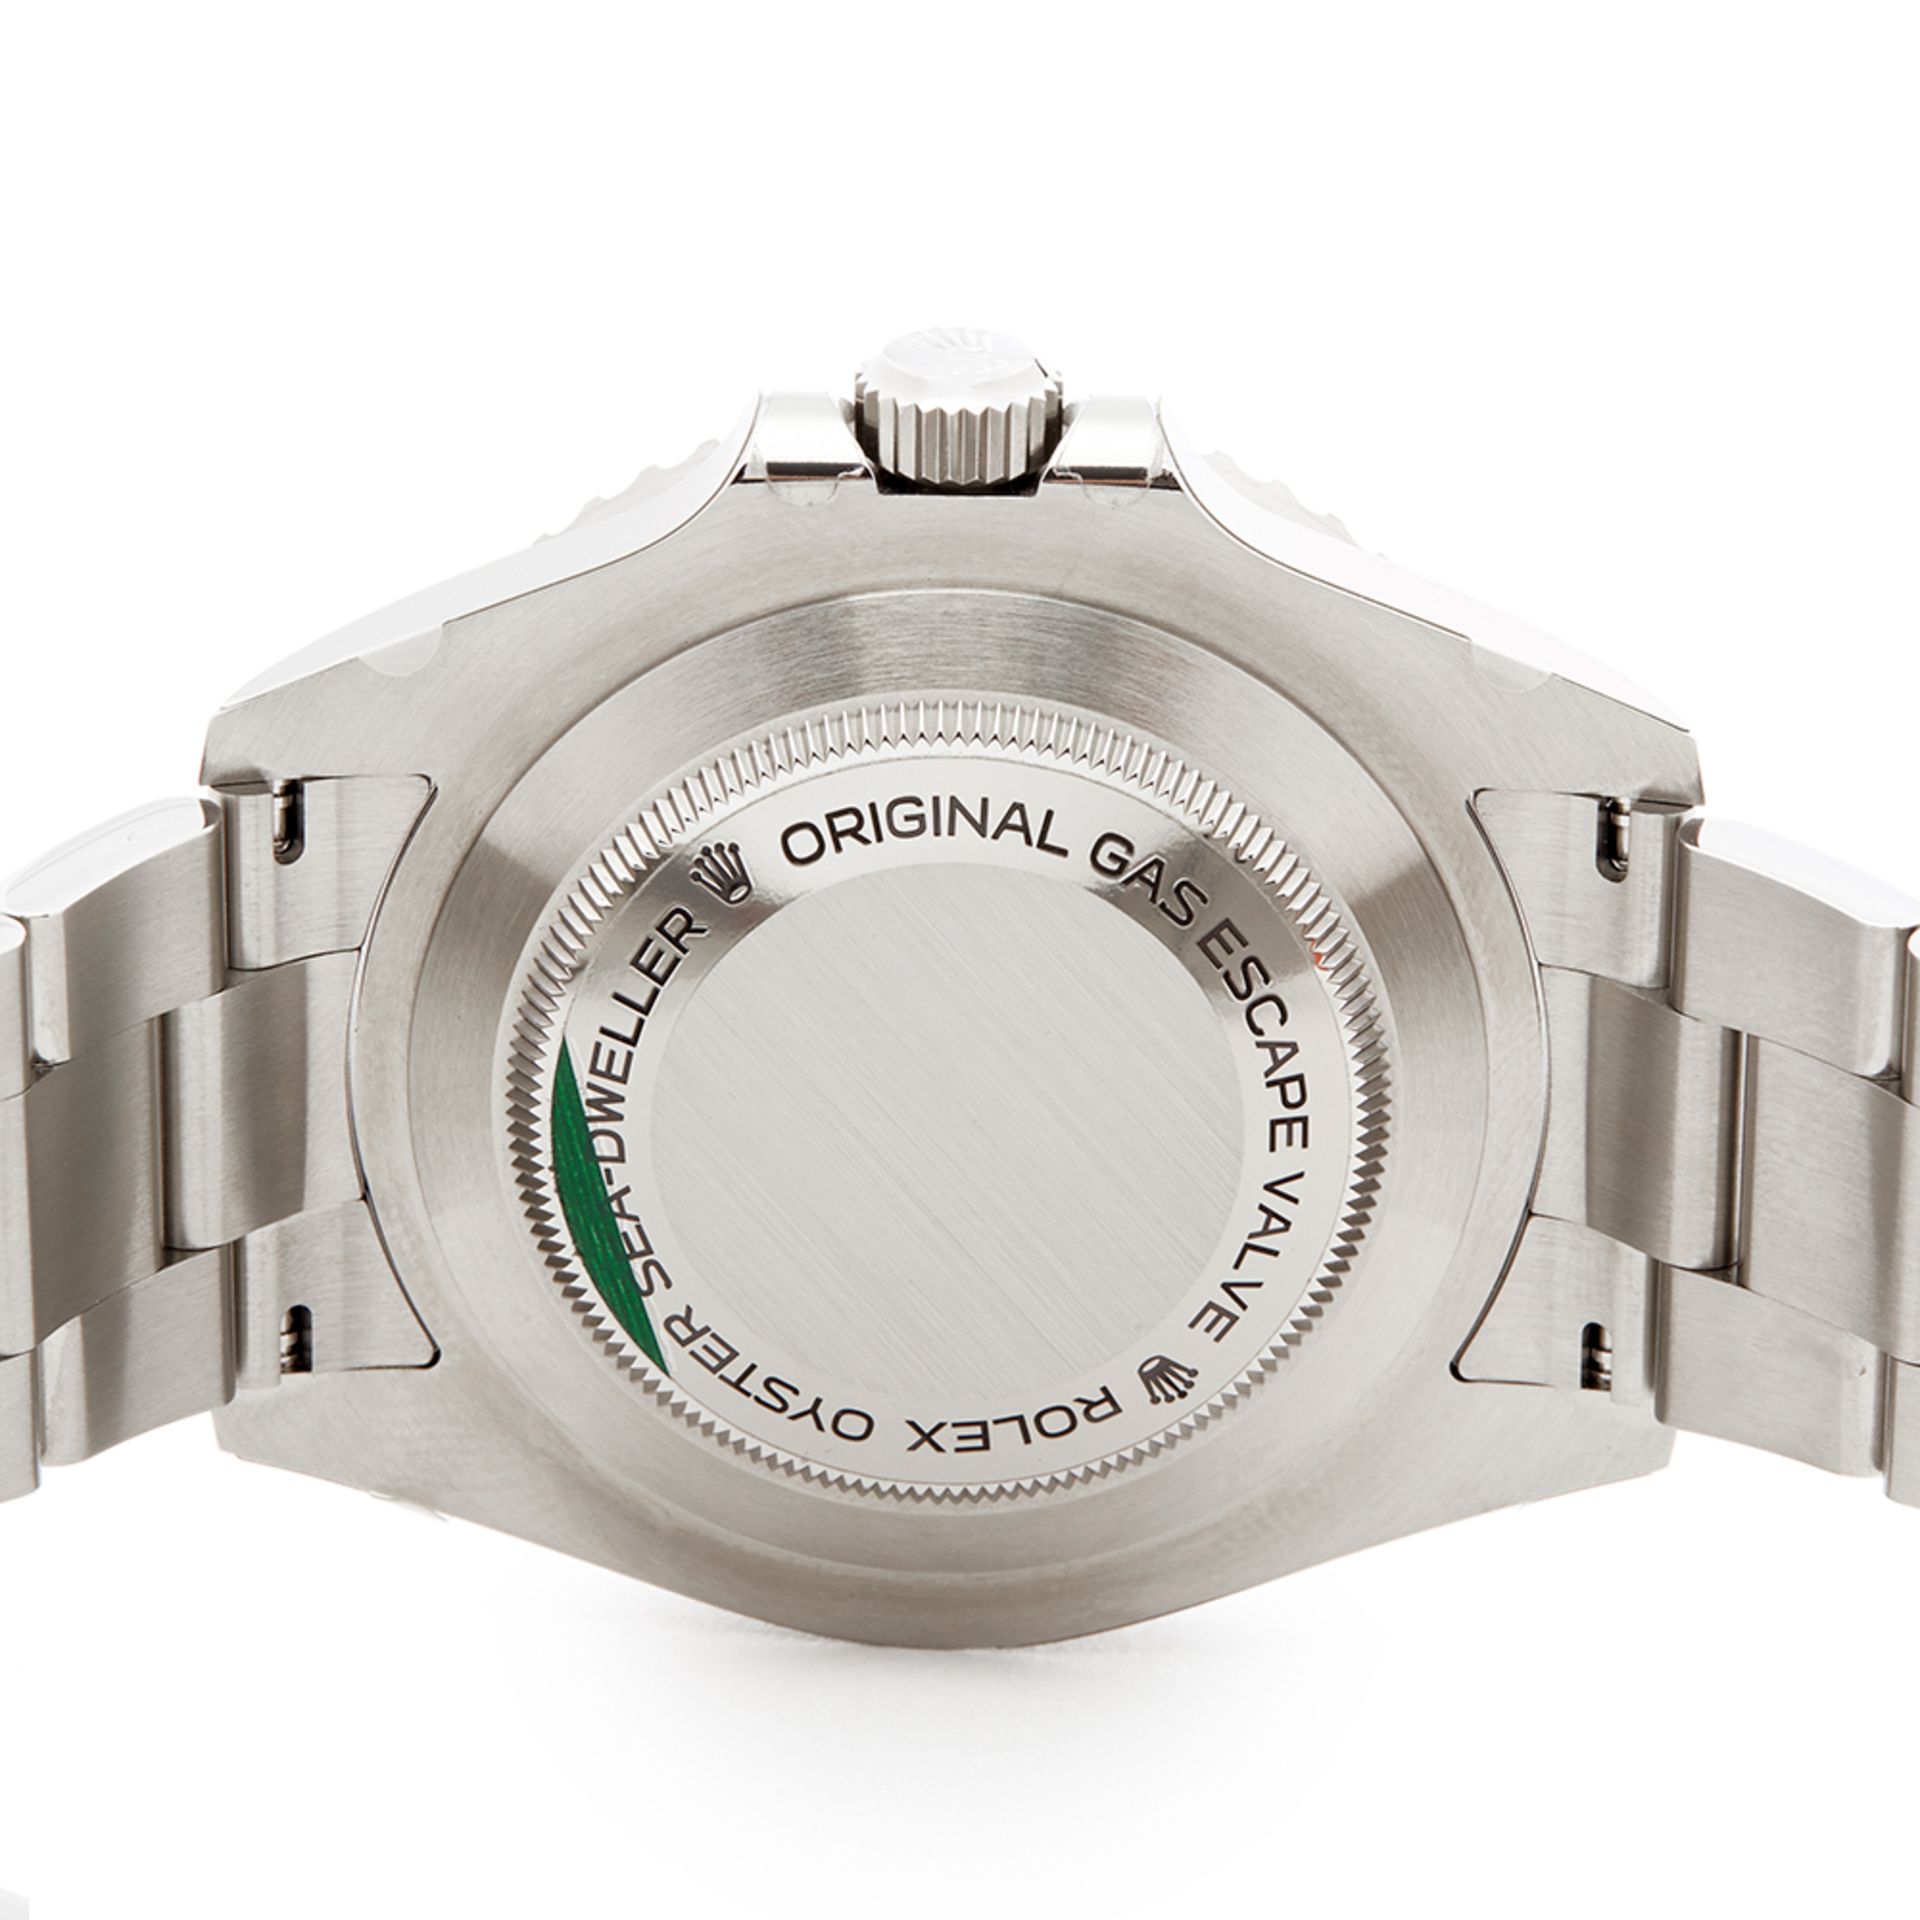 Rolex Sea-Dweller Anniversary Stainless Steel - 126600 - Image 6 of 7